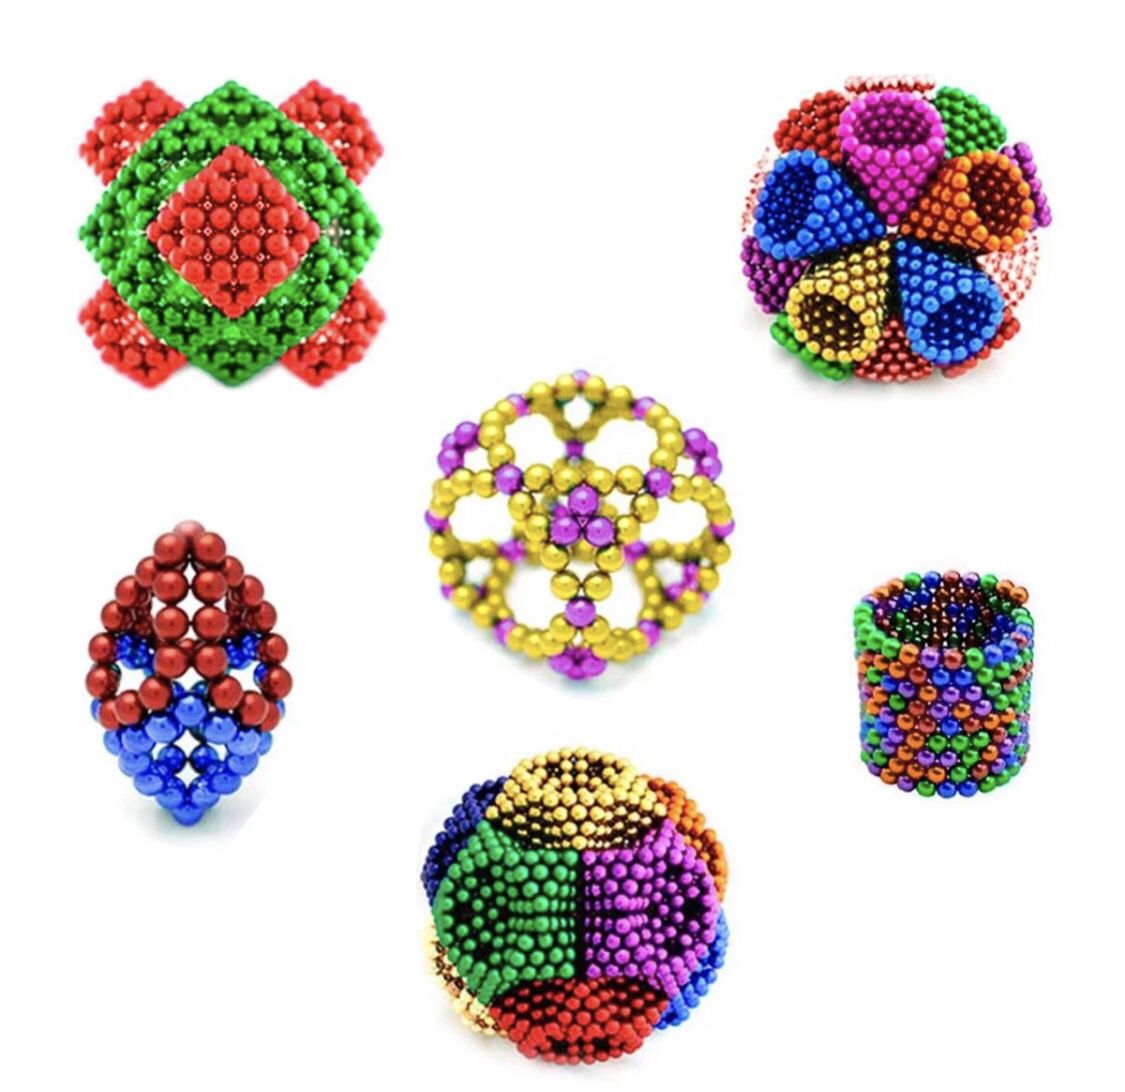 COPY - Yaranka 546Pcs Magnetic Balls-Best Stress/Anxiety Relief Toy Desk Toy Ch…